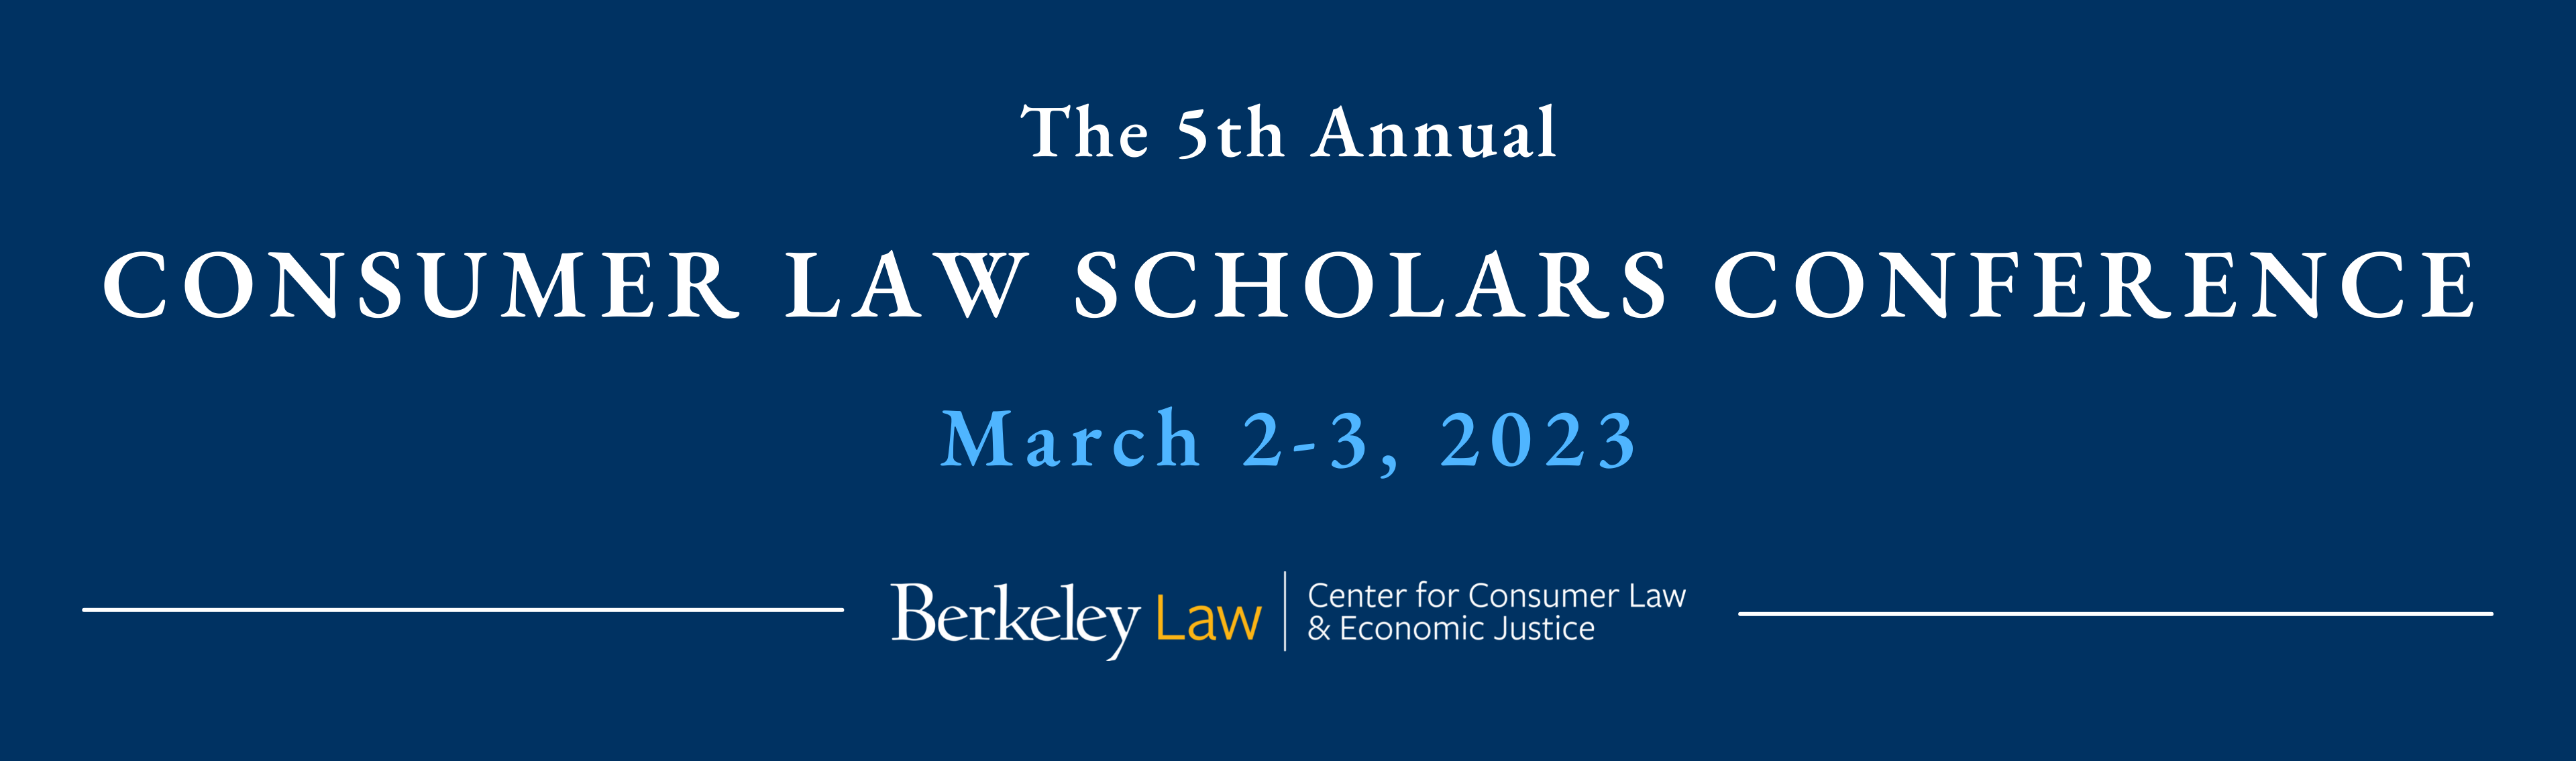 The 5th Annual Consumer Law Scholars Conference.  March 2-3, 2023.  Hosted by the Berkeley Center for Consumer Law & Economic Justice